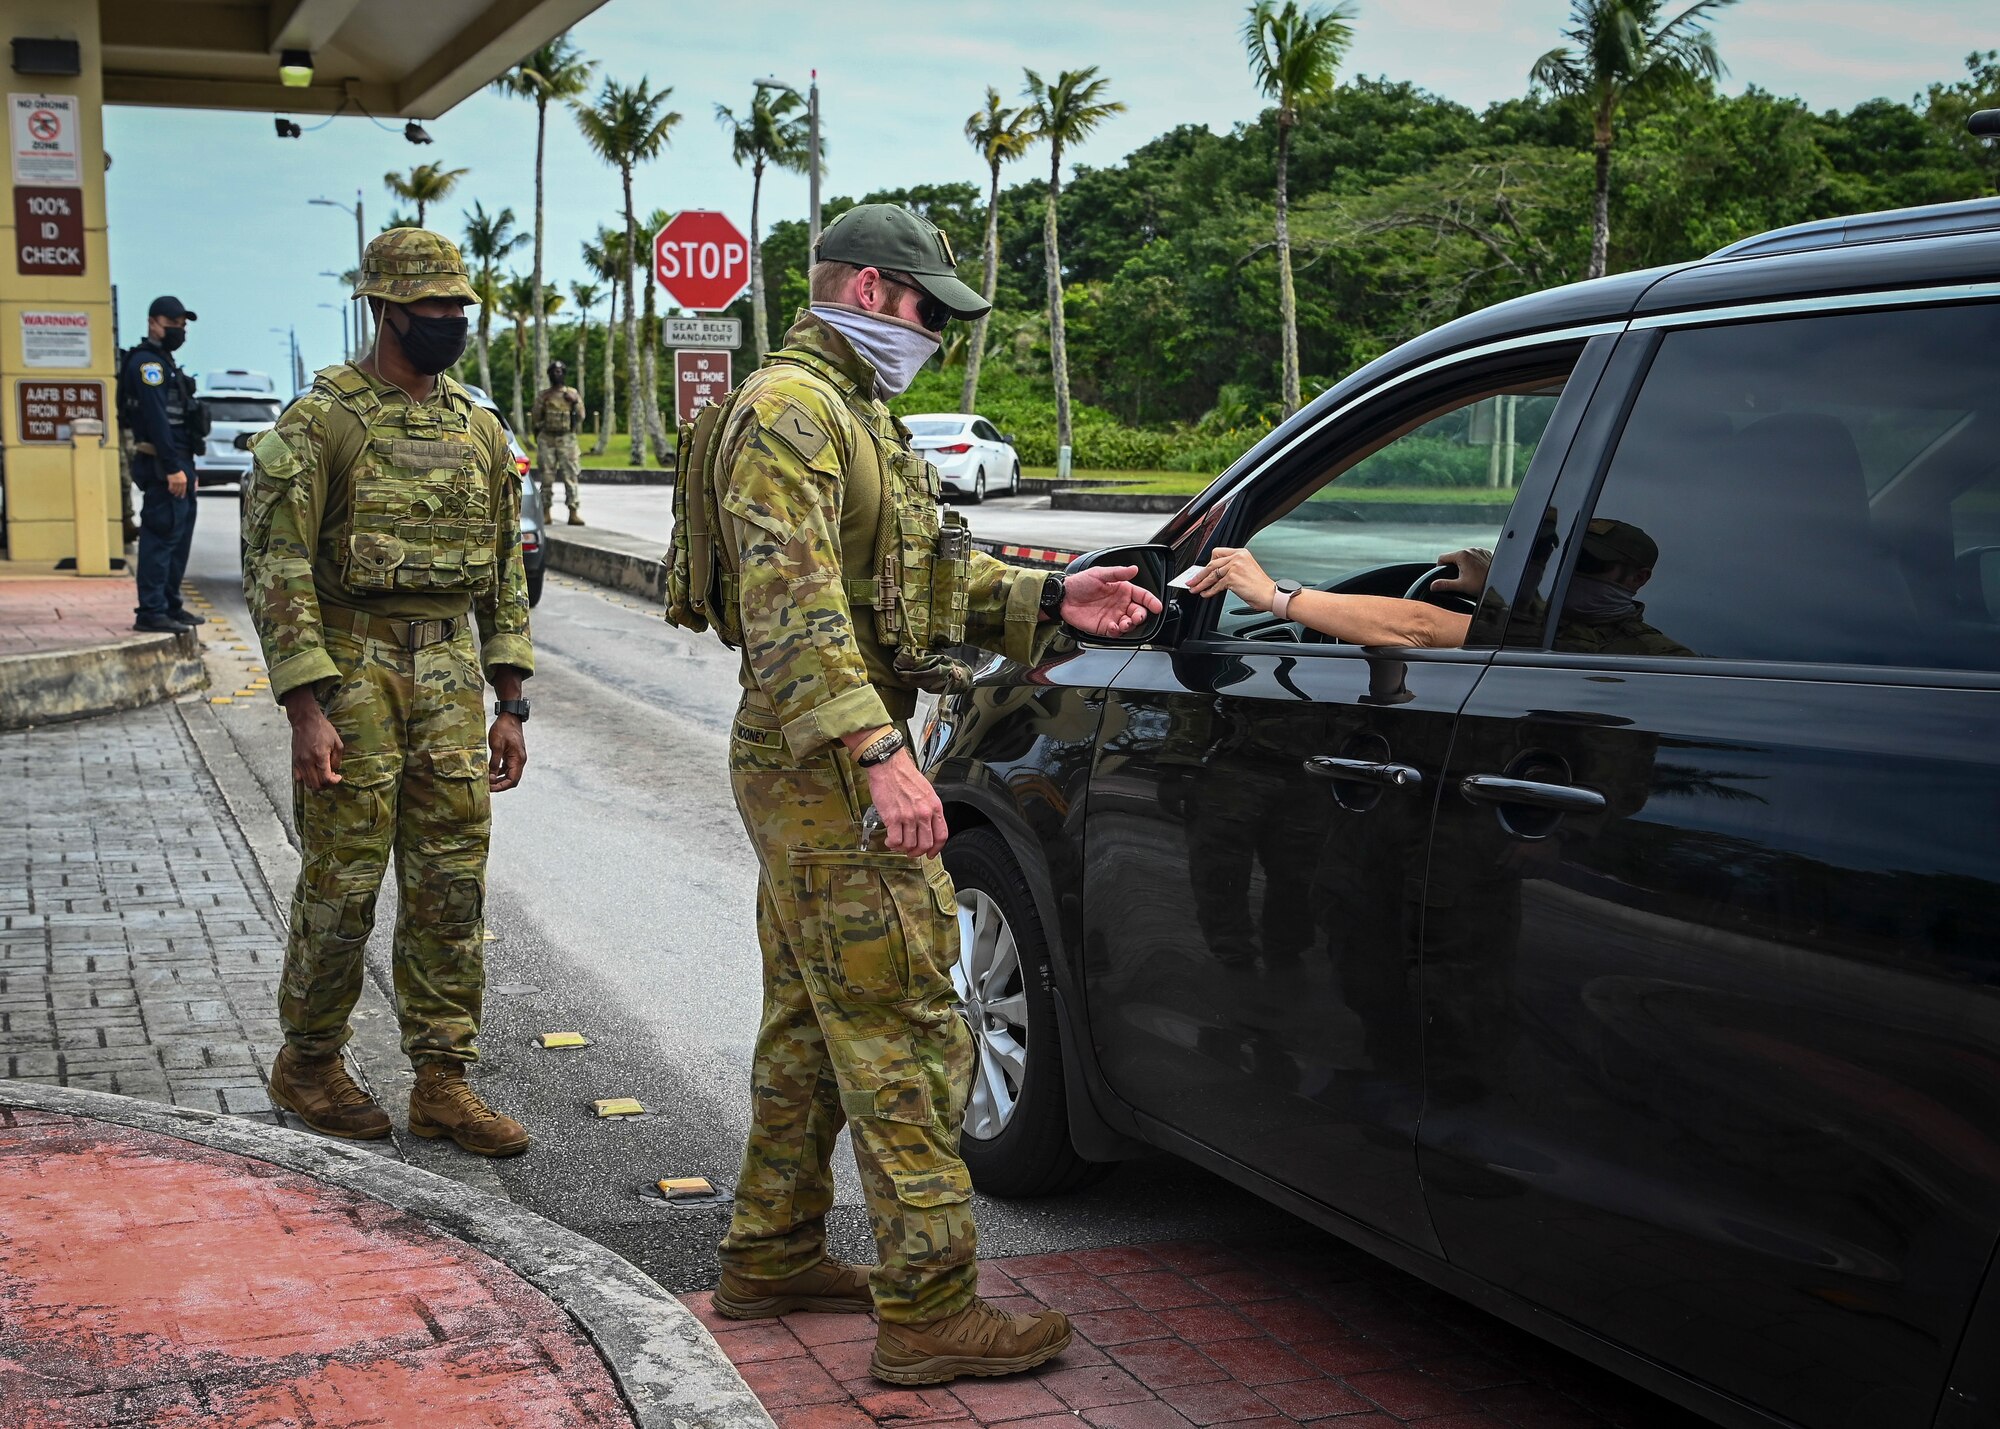 Royal Australian Air Force personnel conduct an identification card check at Arc Light Gate during Cope North 22 on Andersen Air Force Base, Guam, Feb. 15, 2022.